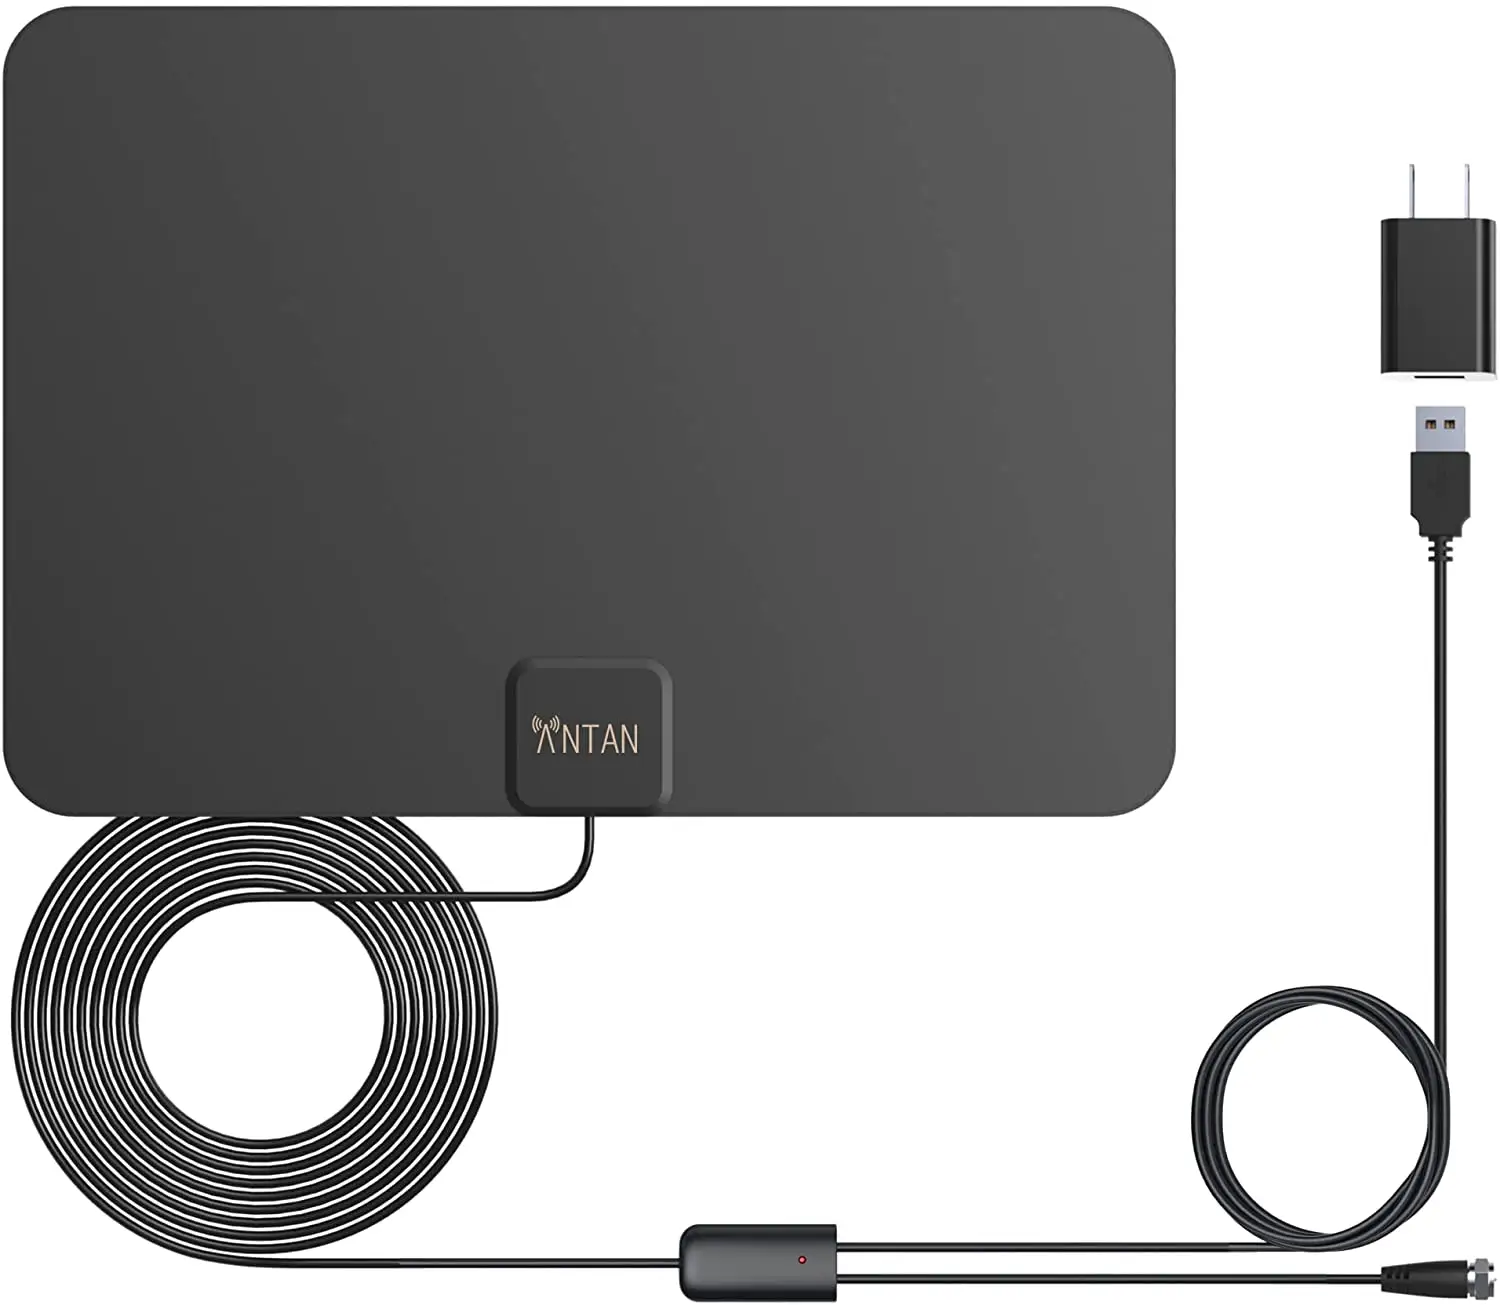 Indoor Amplified HD TV Antenna Up To 45 65 Mile Range Support 8K 4K 1080p VHF UHF Free View Television Local Channels